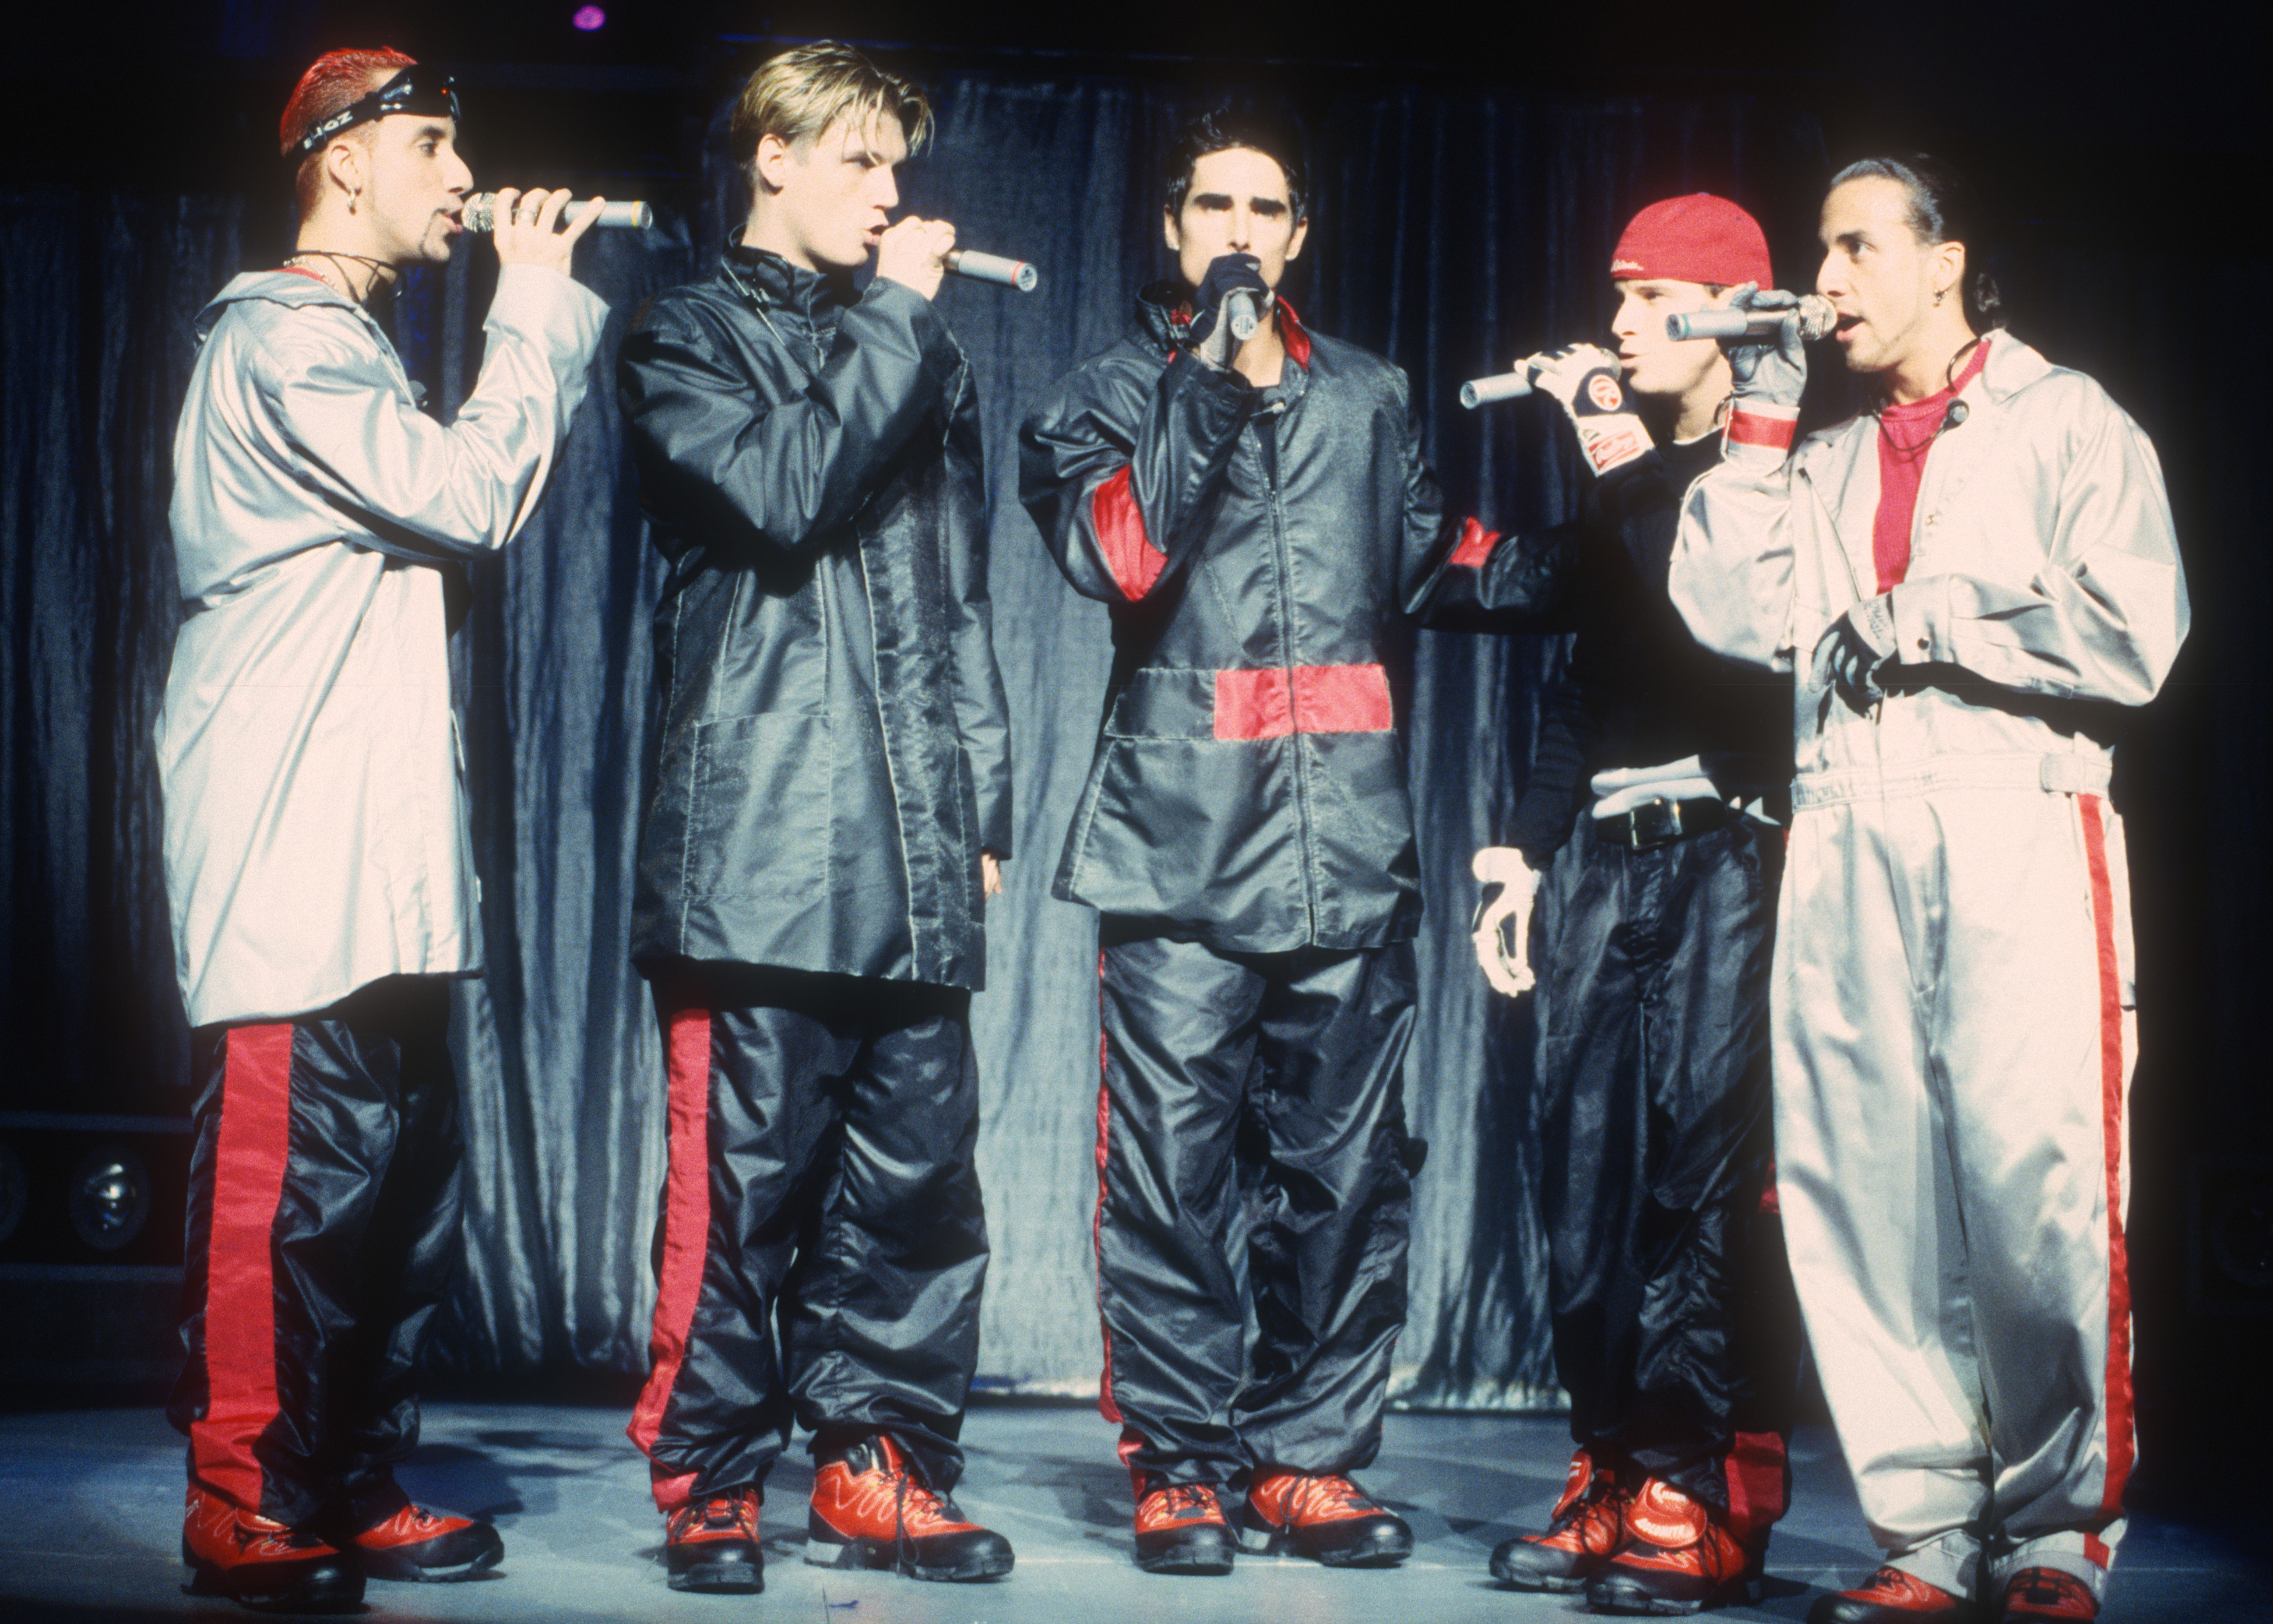 AJ McLean, Nick Carter, Kevin Richardson, Brian Littrell, and Howie Dorough performing at the Universal Amphitheatre in Los Angeles, California on August 8, 1998